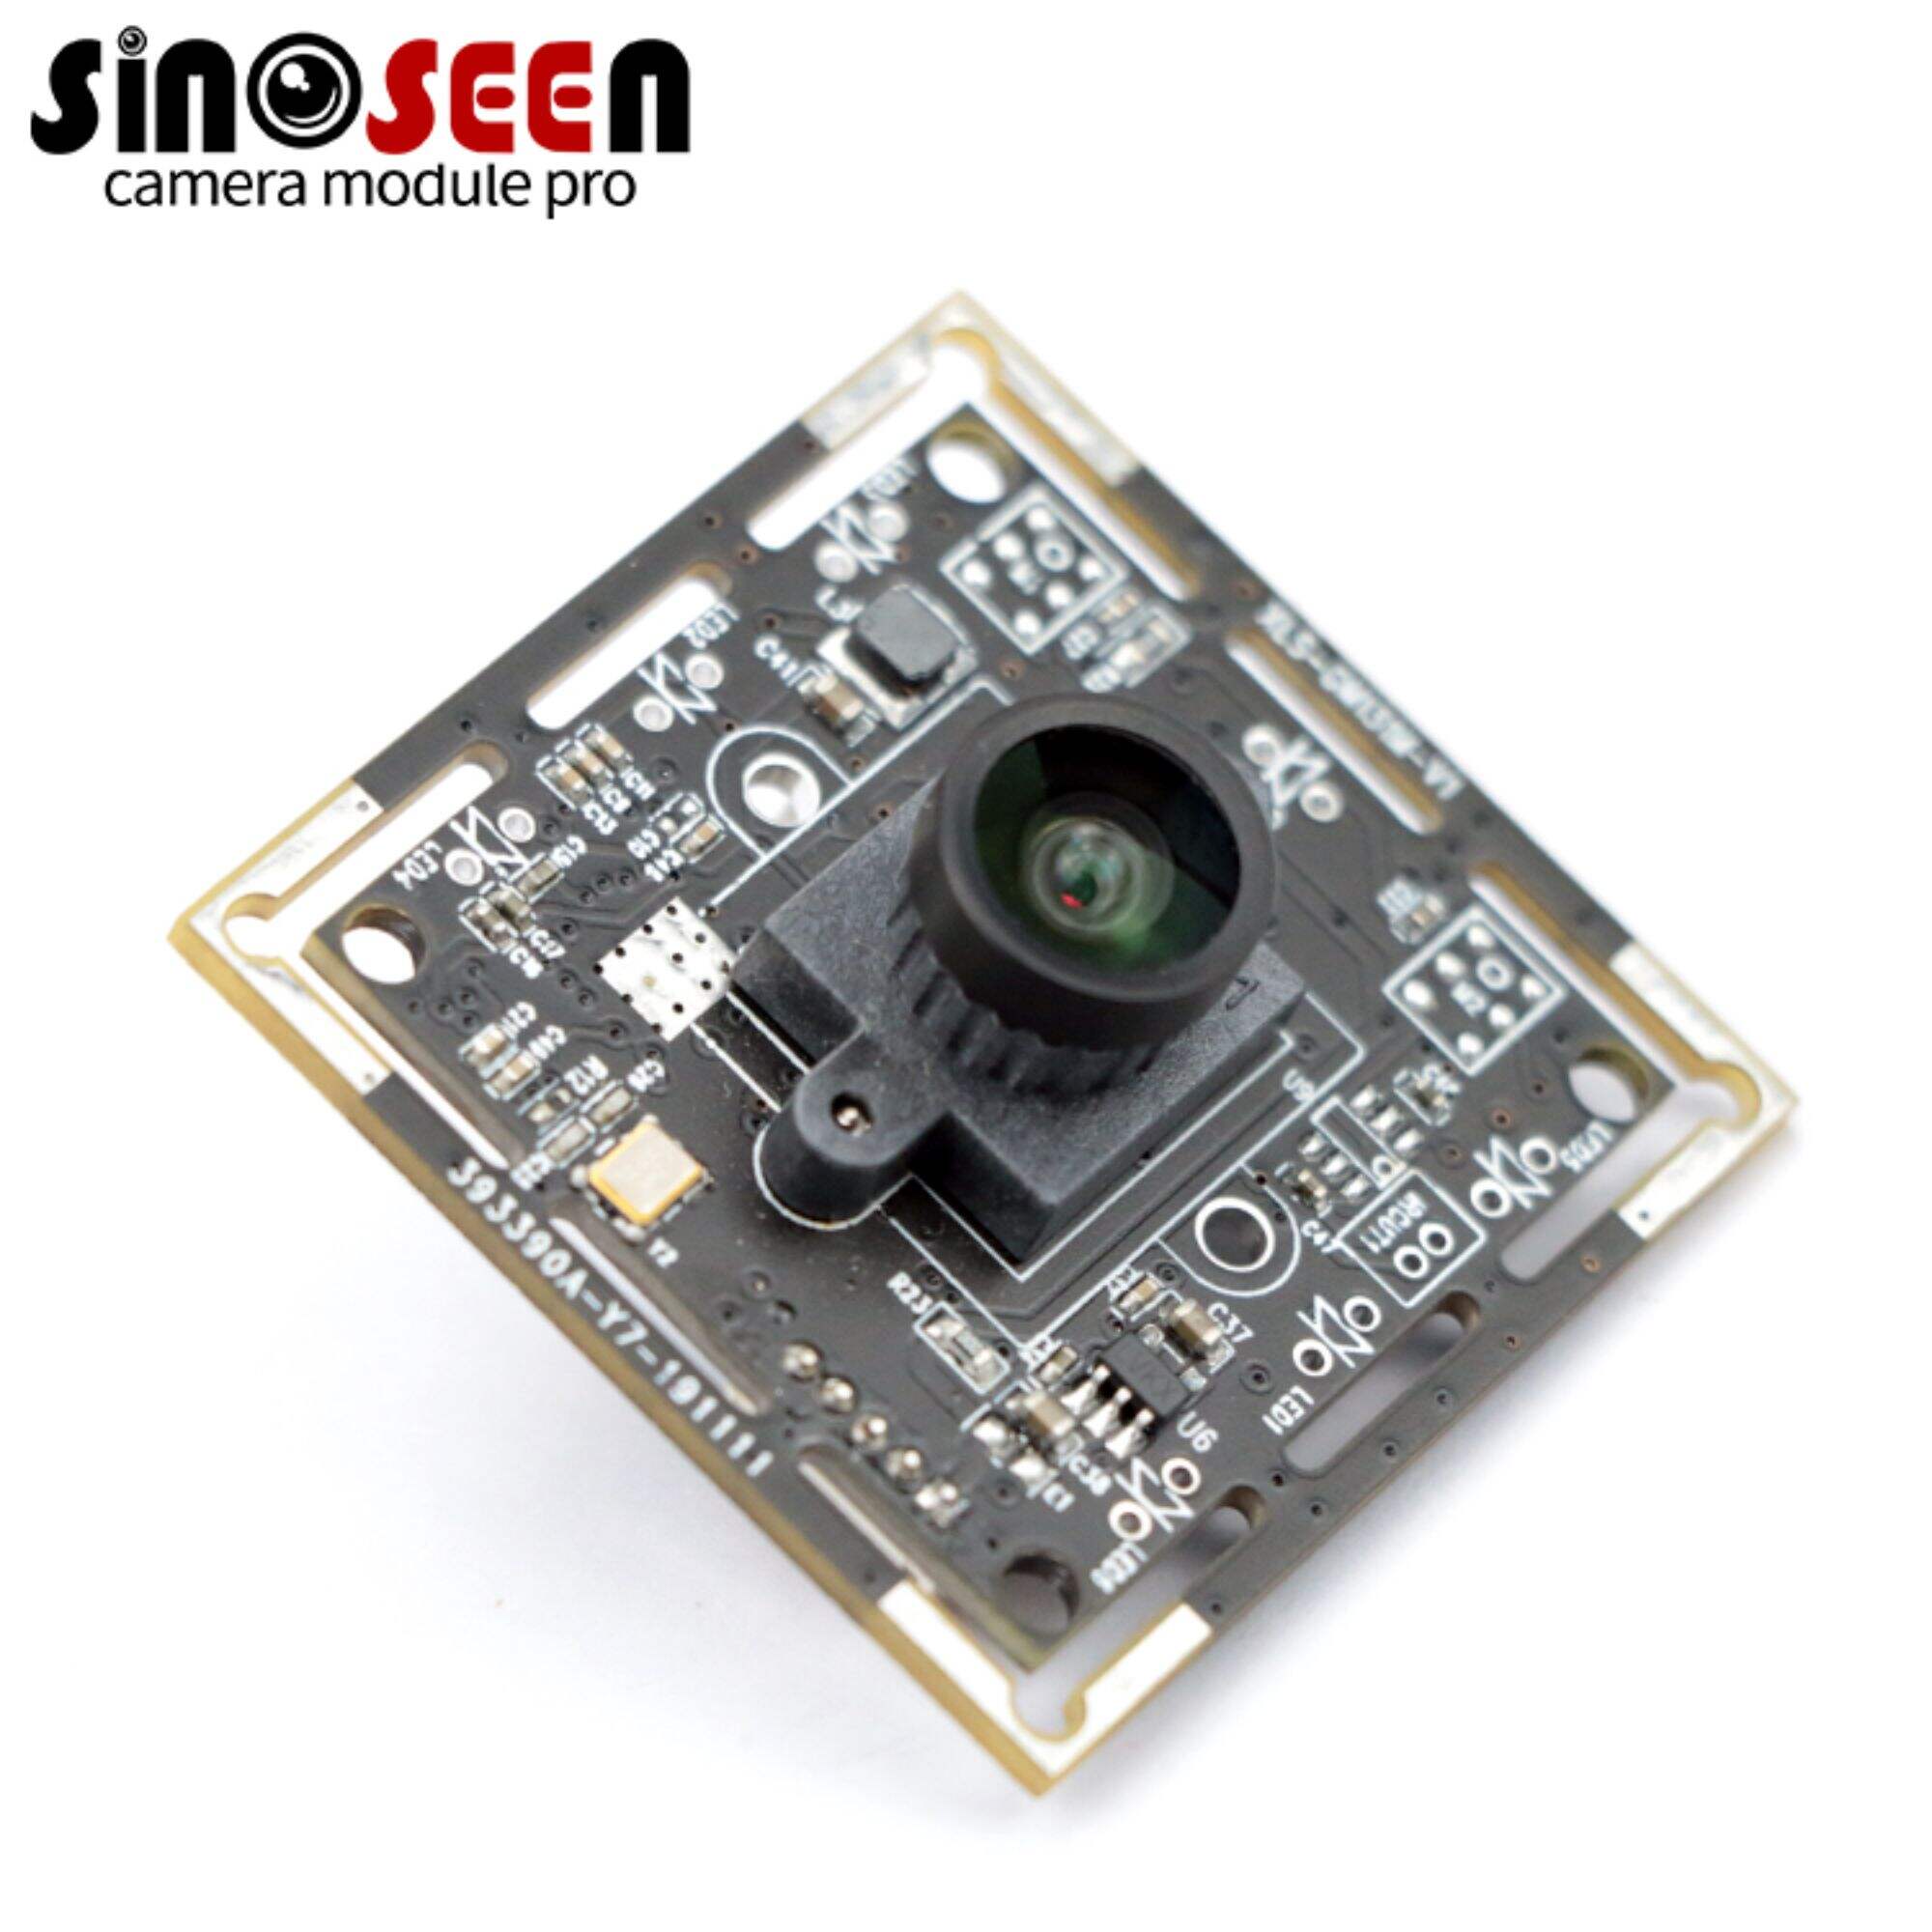 Global Shutter Camera Module for IoT Devices 2MP Fixed Focus RoHS Approved